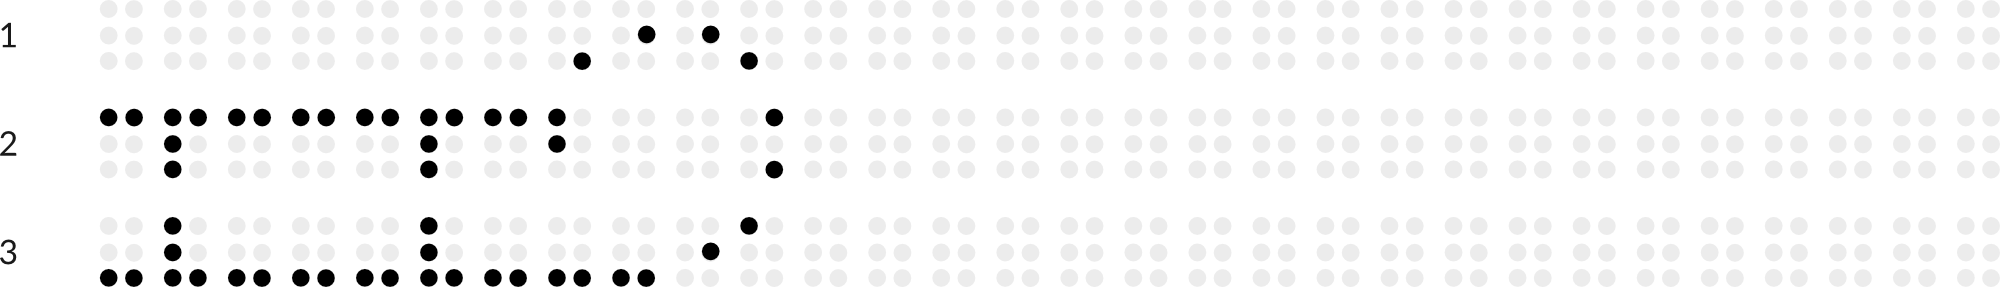 Braille drawing with grid: sledge